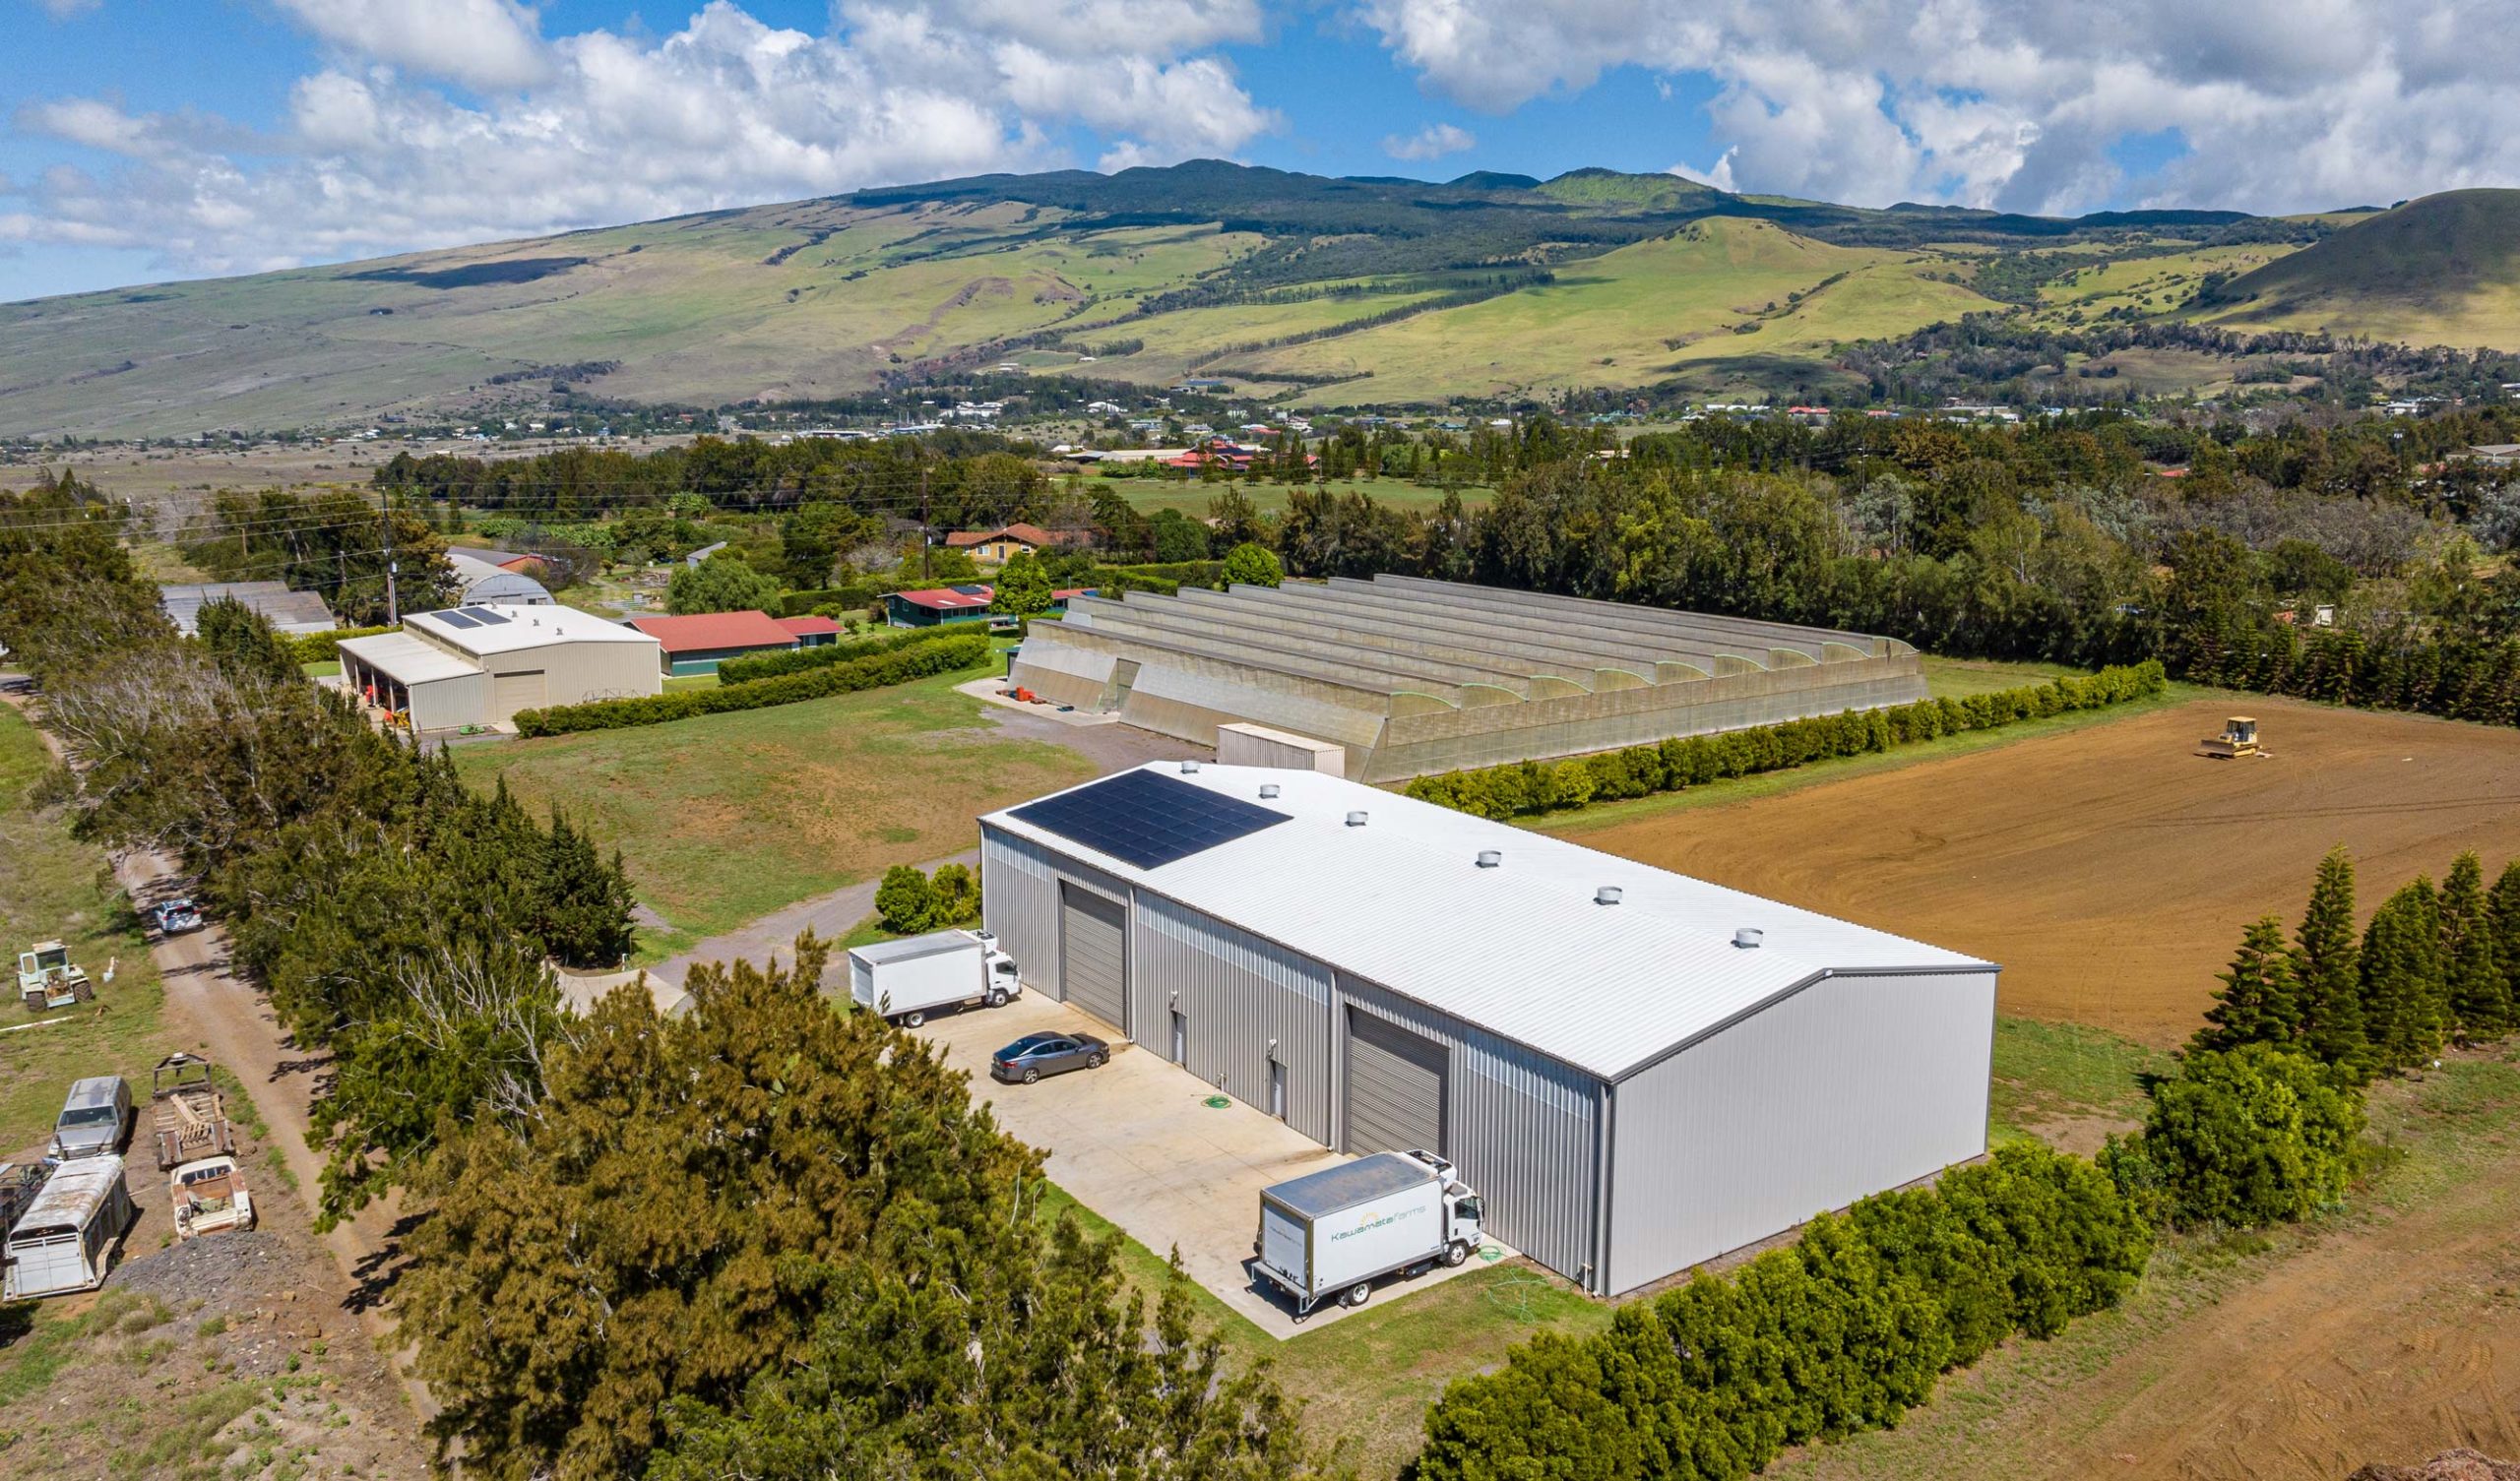 An aerial view of an agriculture building with rooftop solar panels.